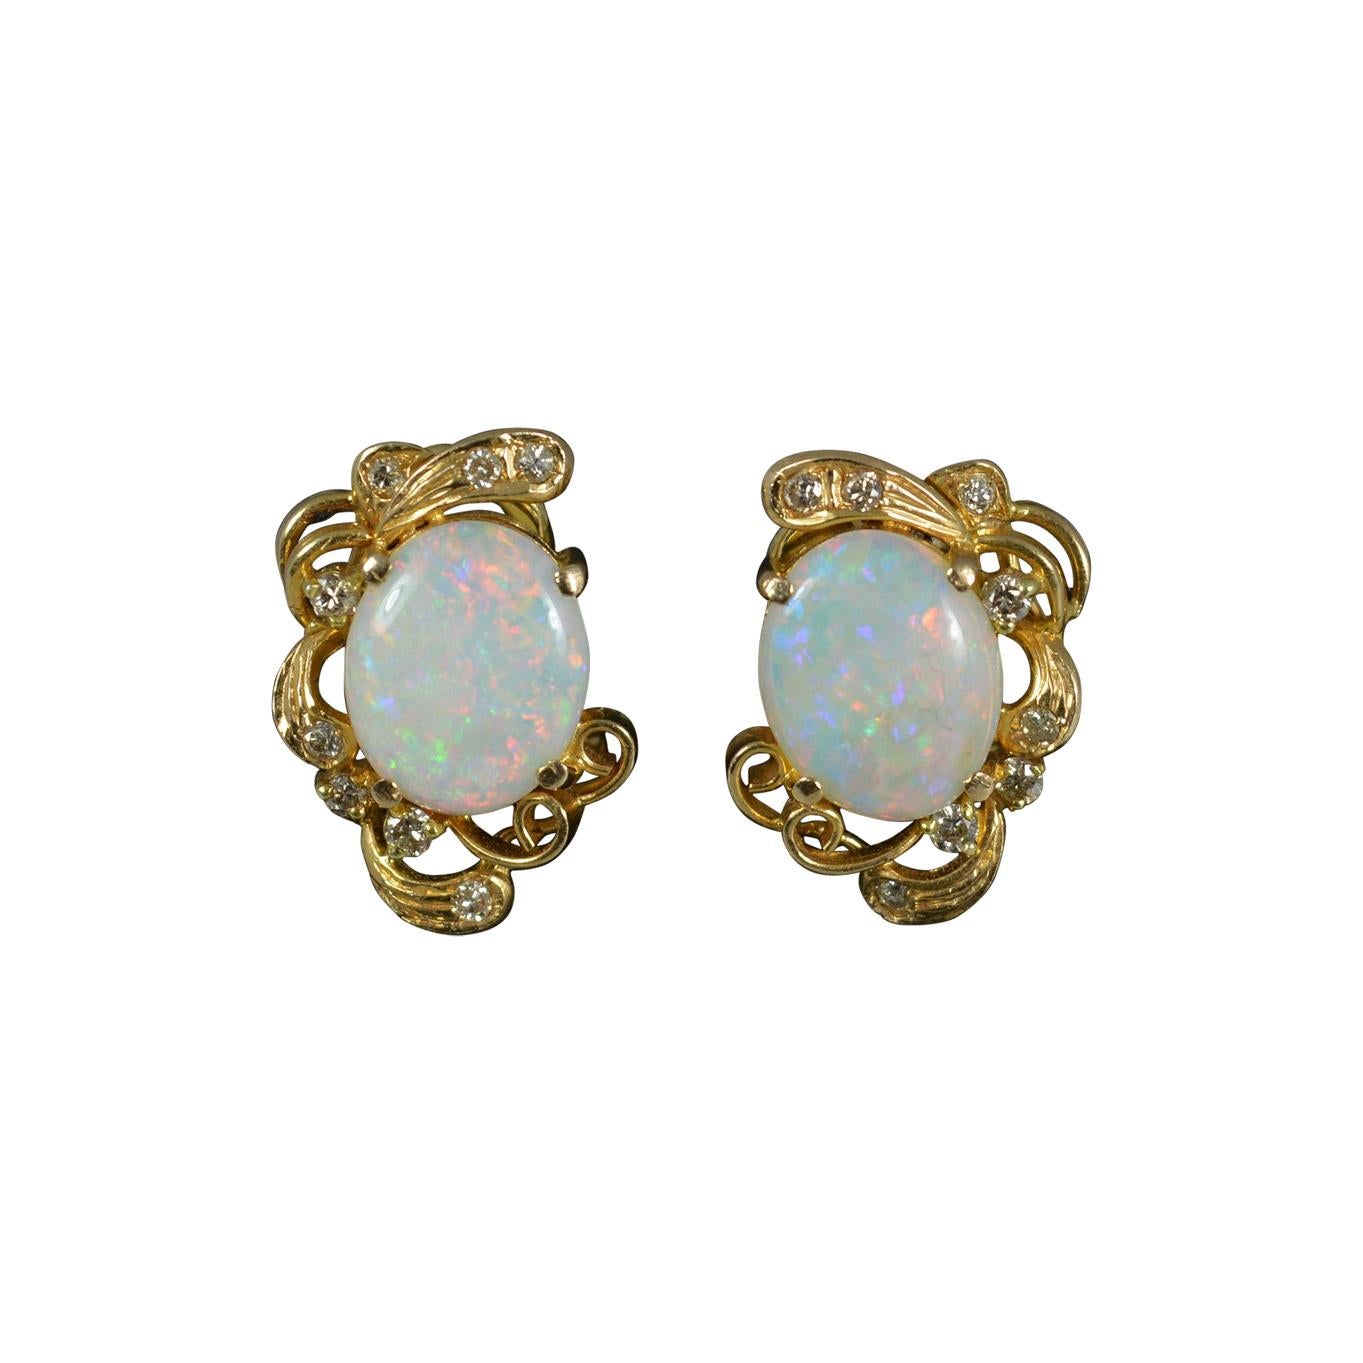 Beautiful 14ct Gold Natural Opal and Diamond Clip On Earrings